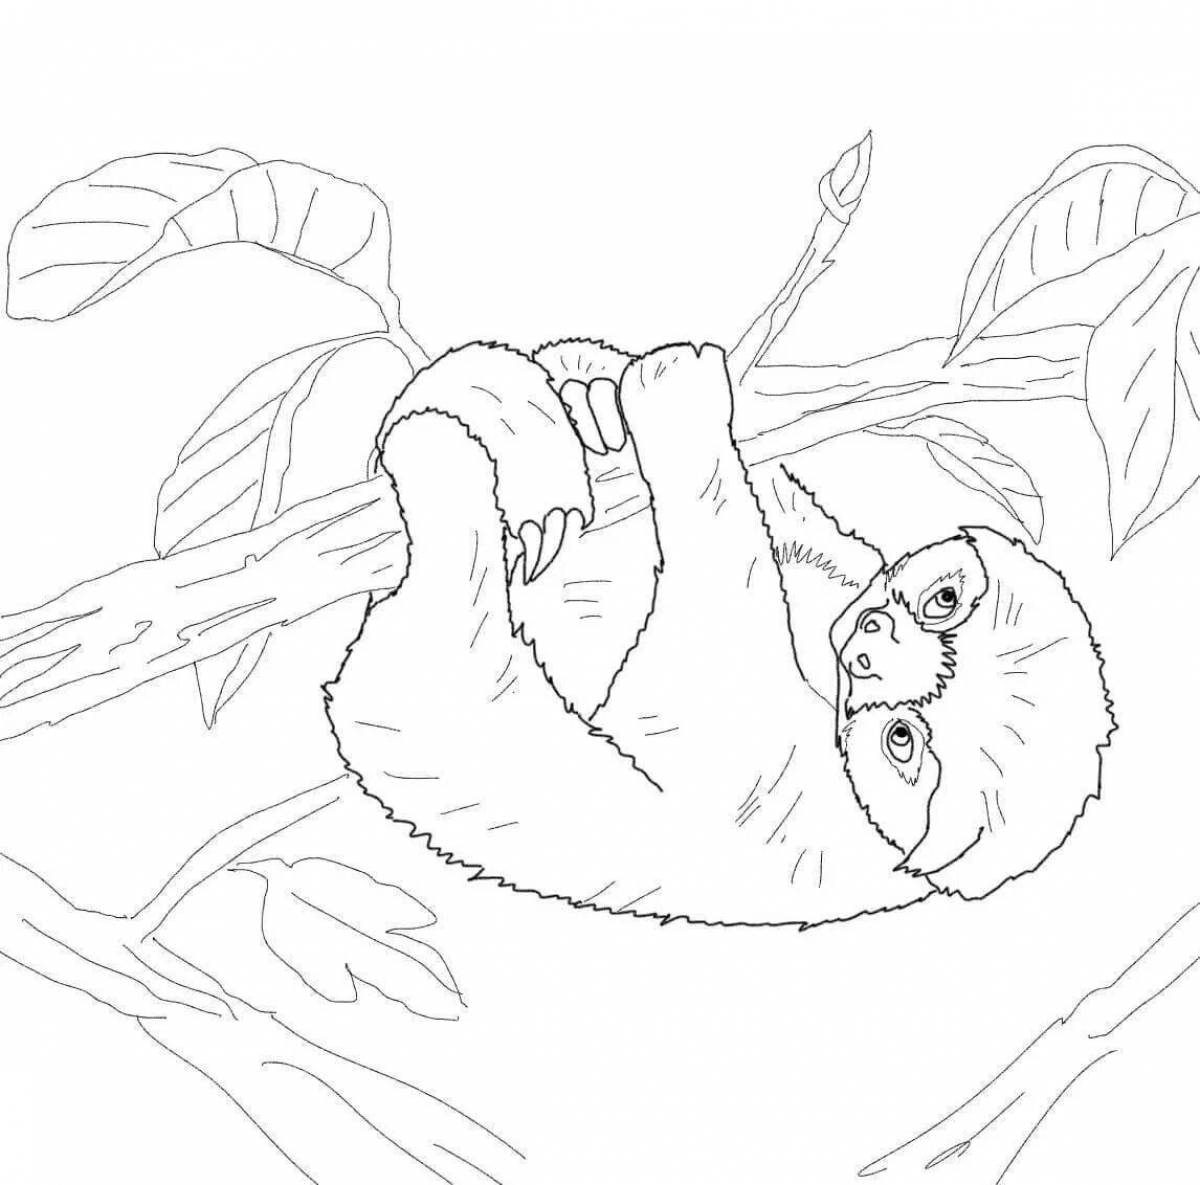 Live sloth coloring for kids